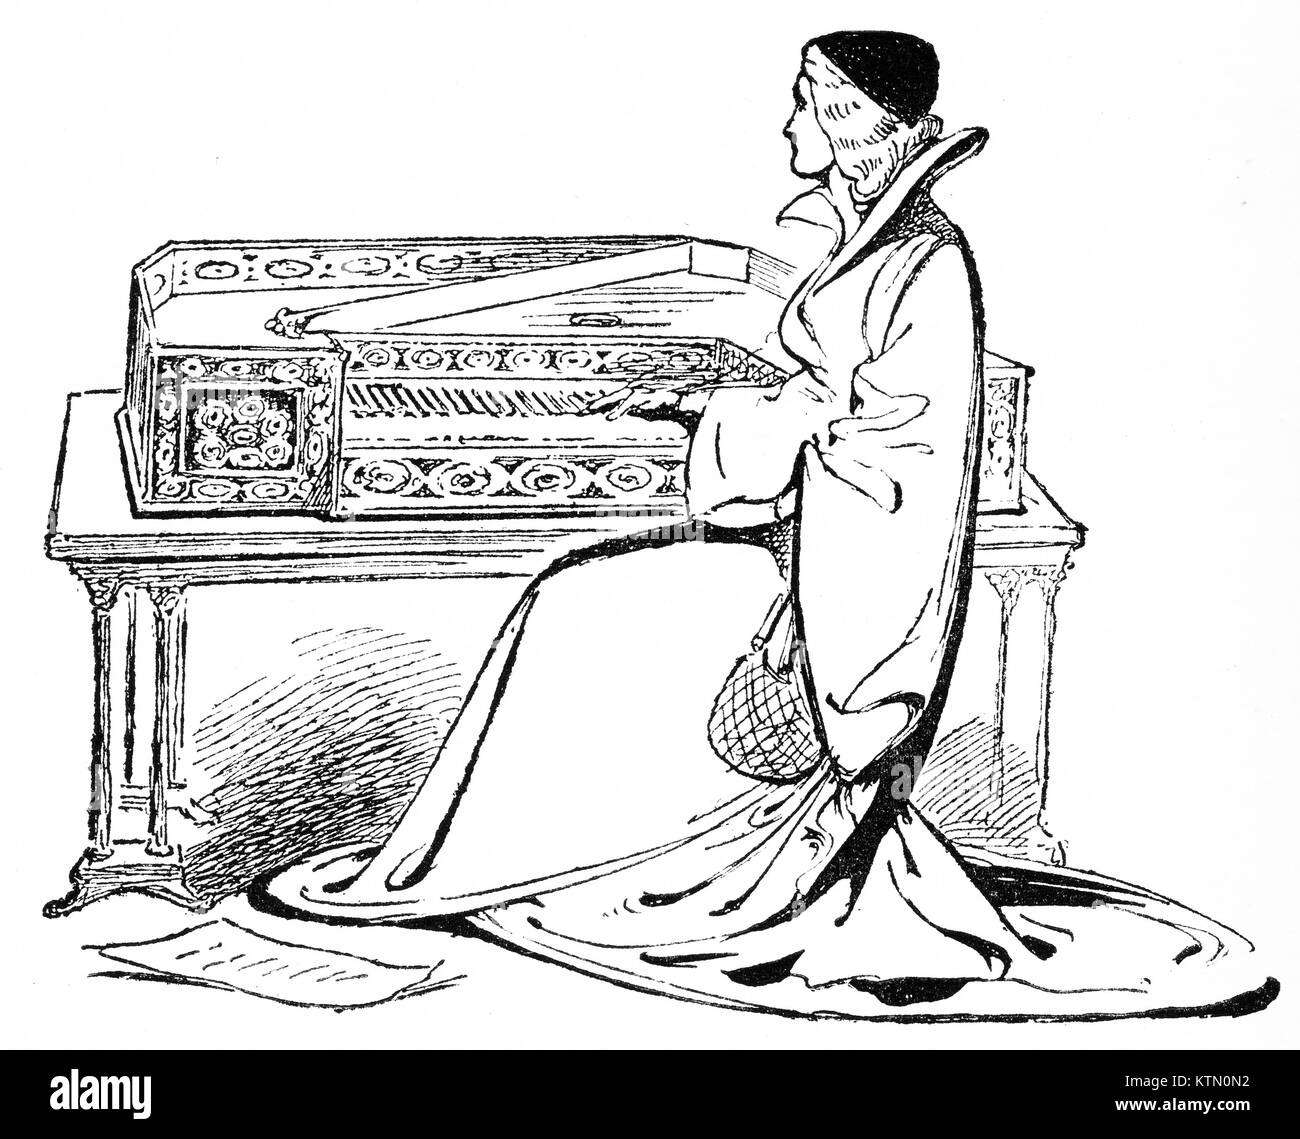 Engraving of a female harpsichord player. From an original engraving in the Historian's History of the World, 1908 Stock Photo